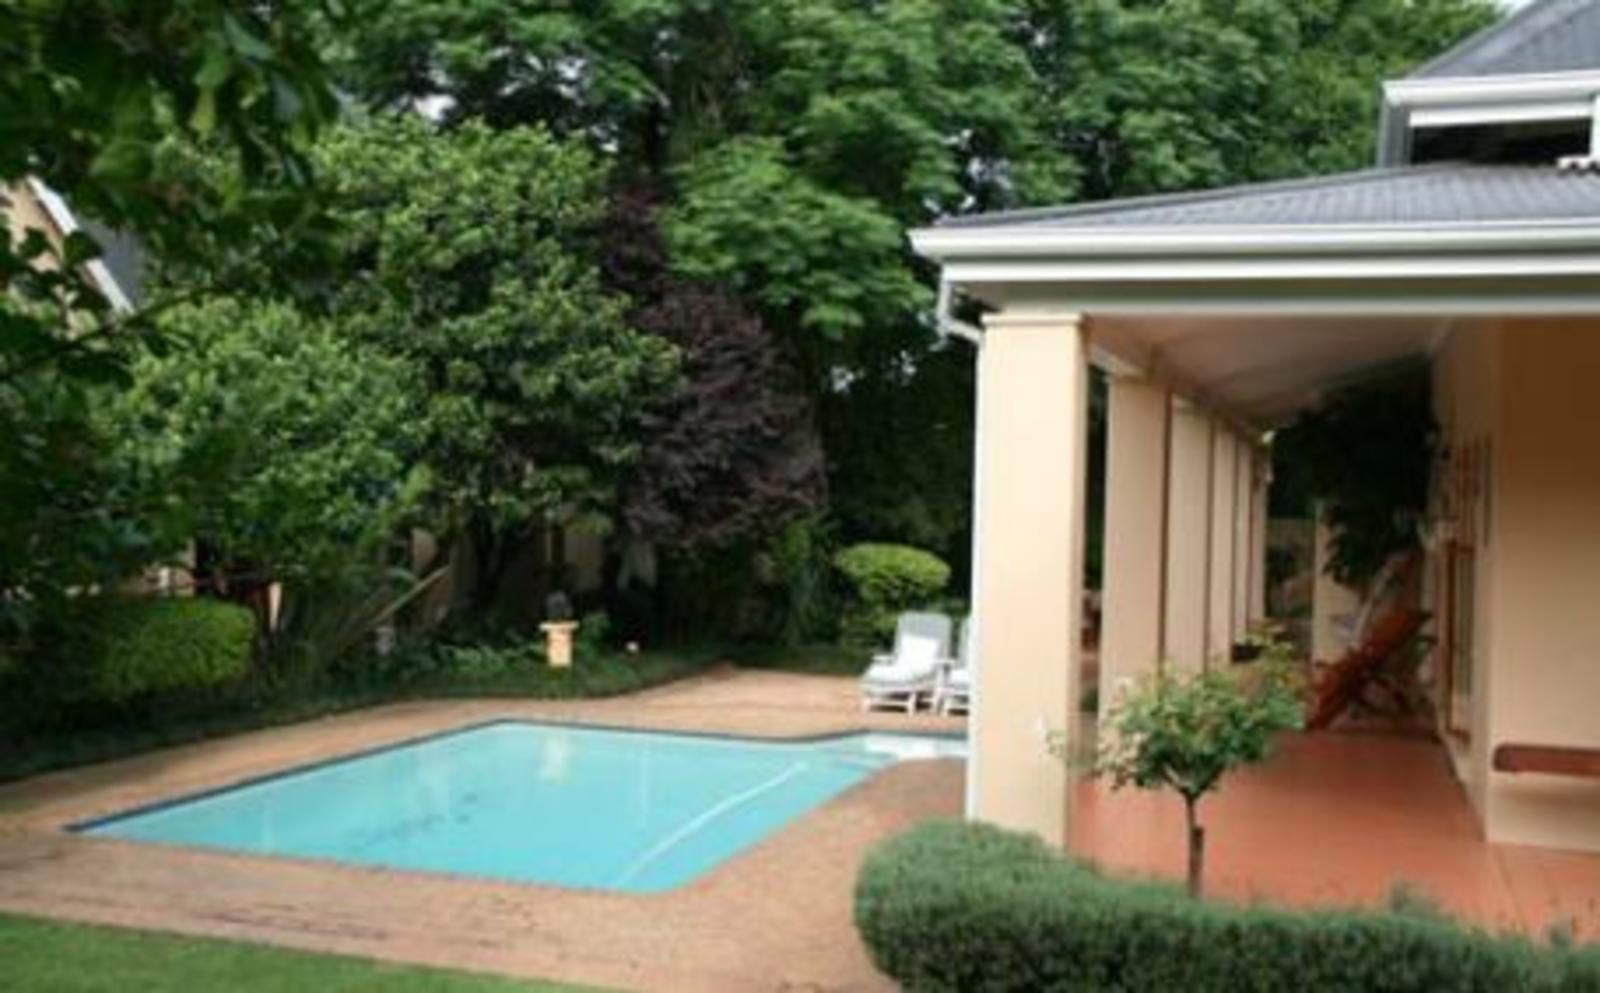 Del Roza Guest House Middelburg Mpumalanga Mpumalanga South Africa House, Building, Architecture, Garden, Nature, Plant, Swimming Pool